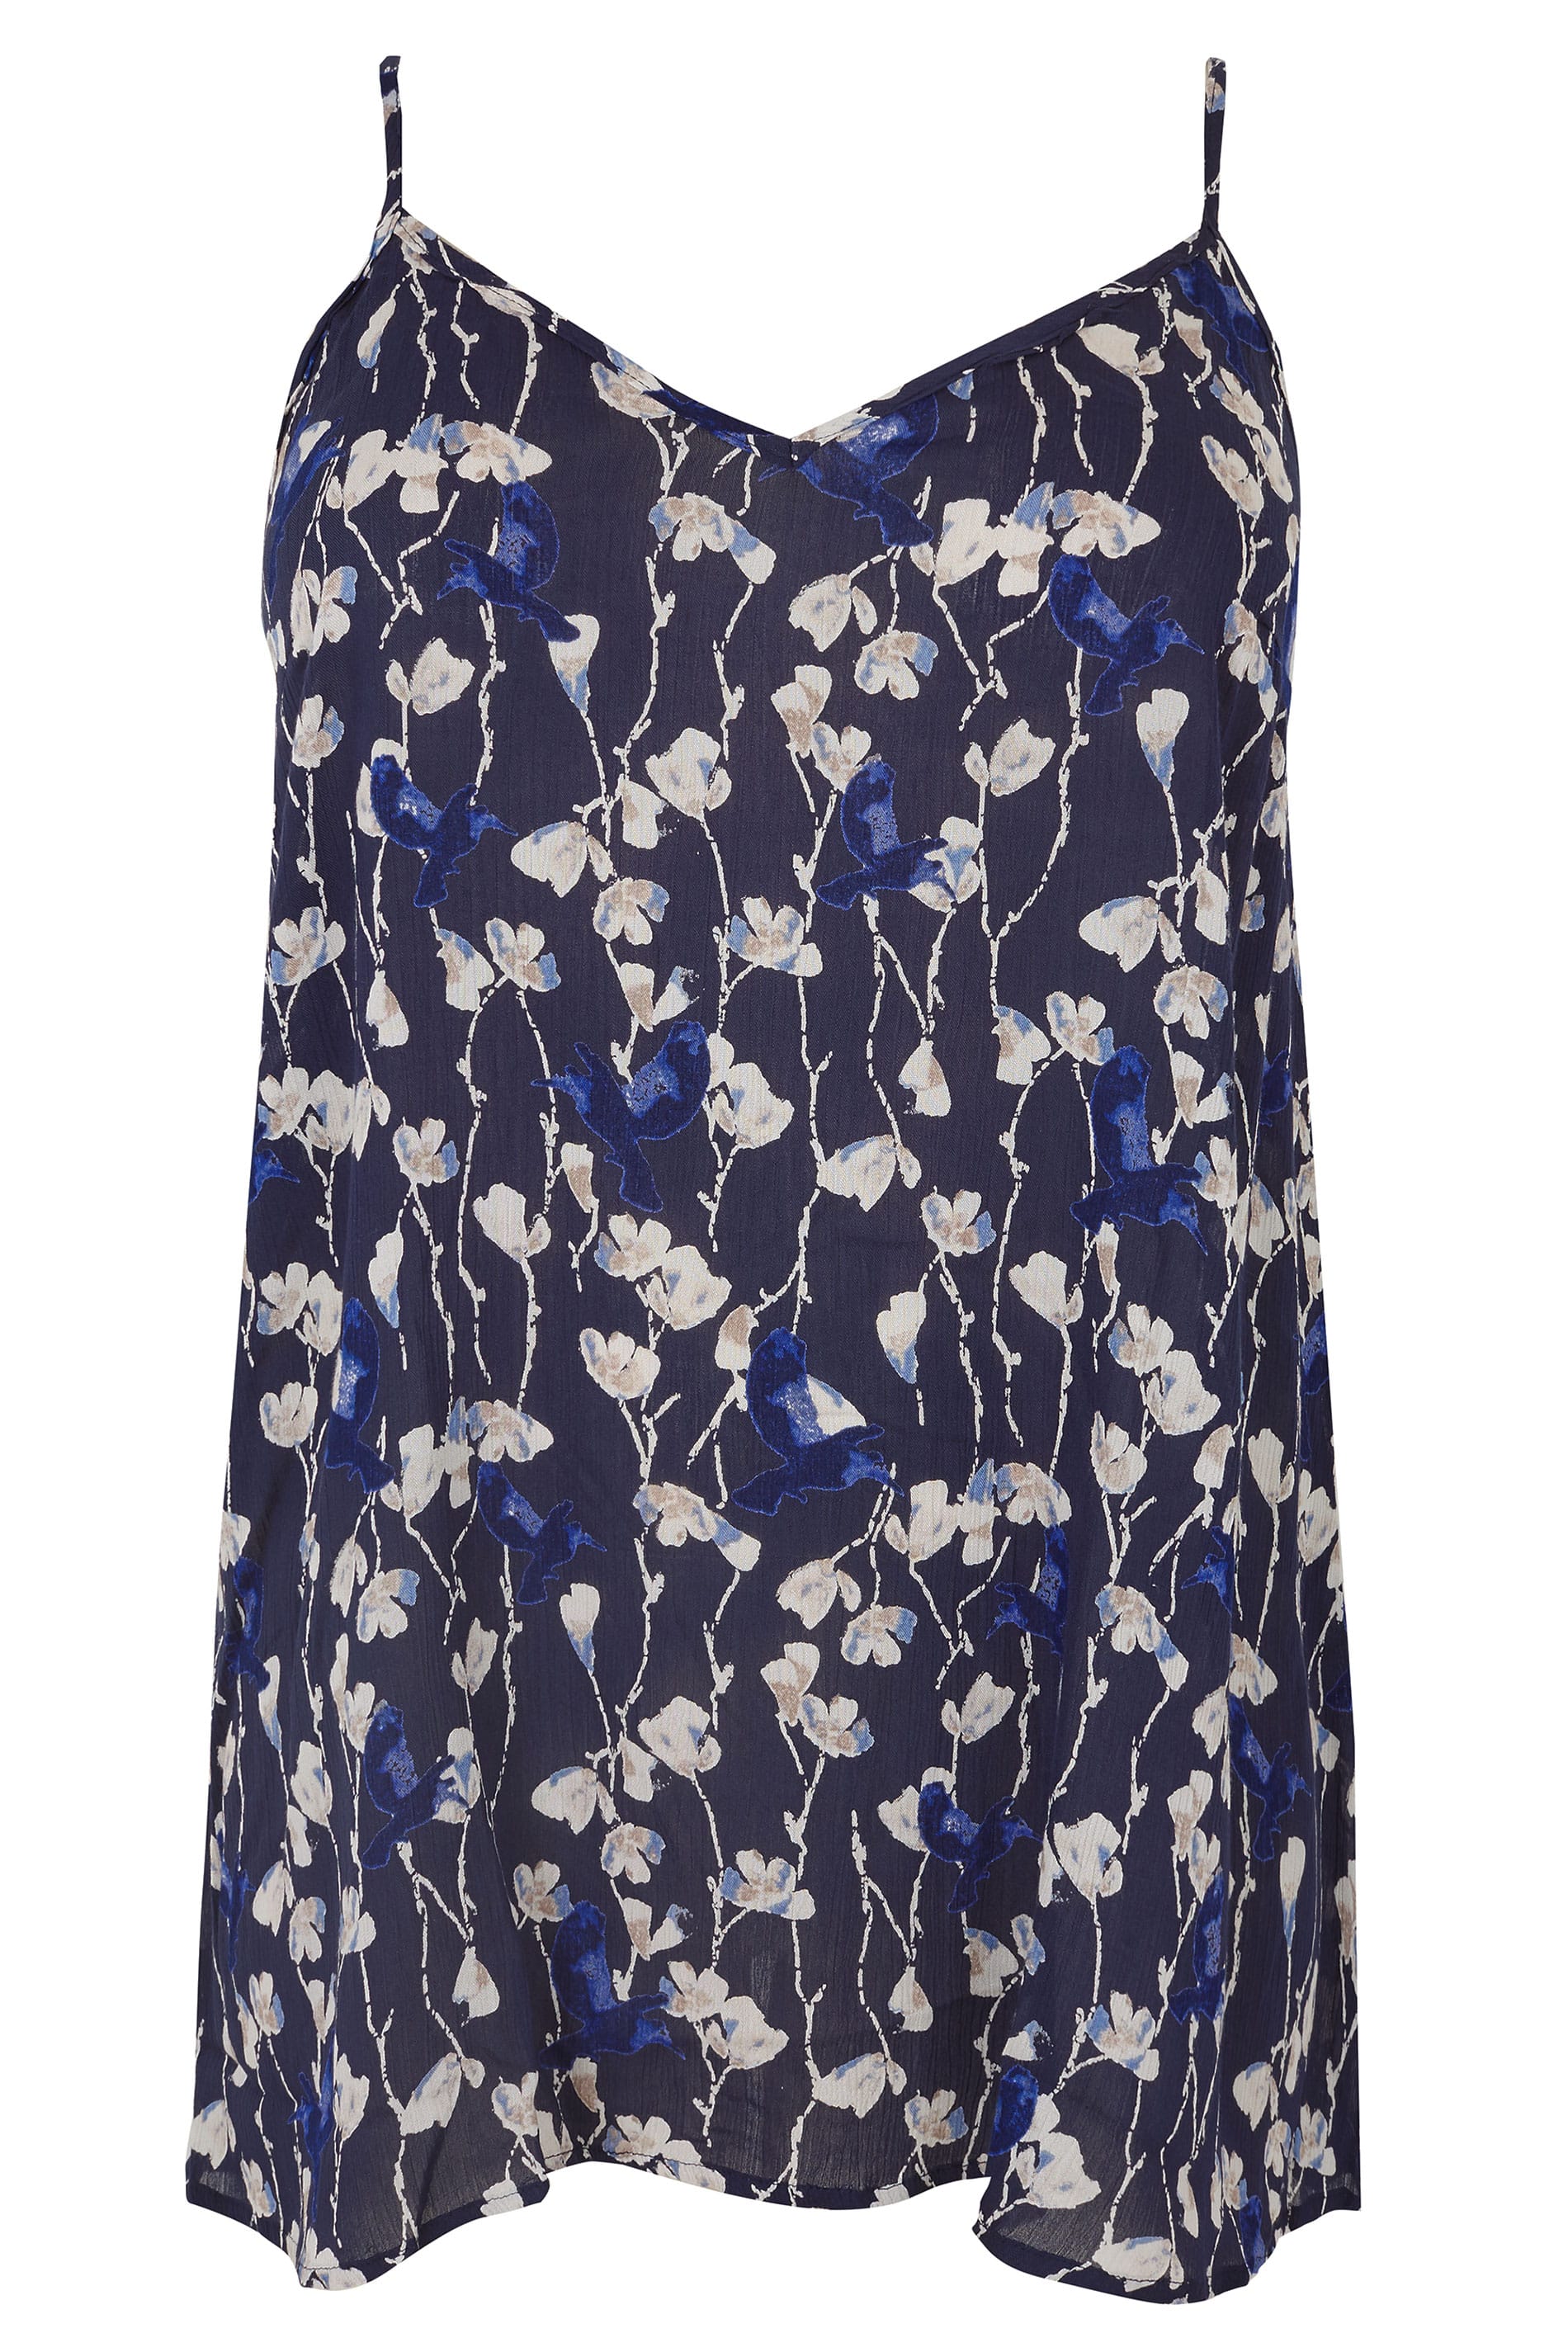 Navy Floral Print Woven Cami Top, plus size 16 to 36